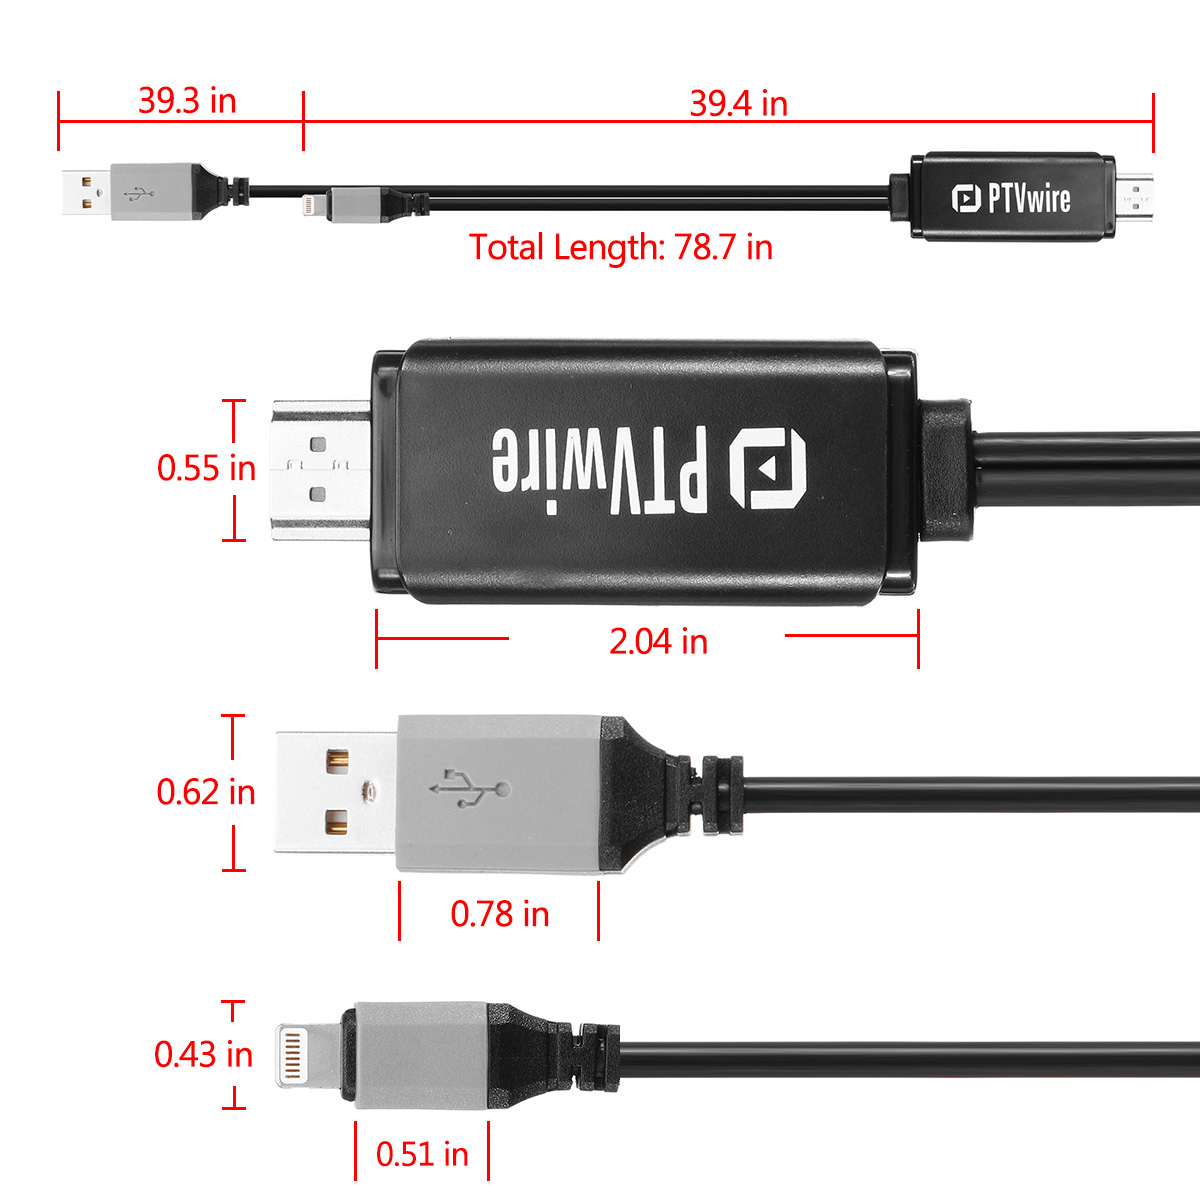 Bakeey USB to HDMI Adapter Cable Support 8 Channels Digital Audio Support Airplay/Mirroring 2M Long